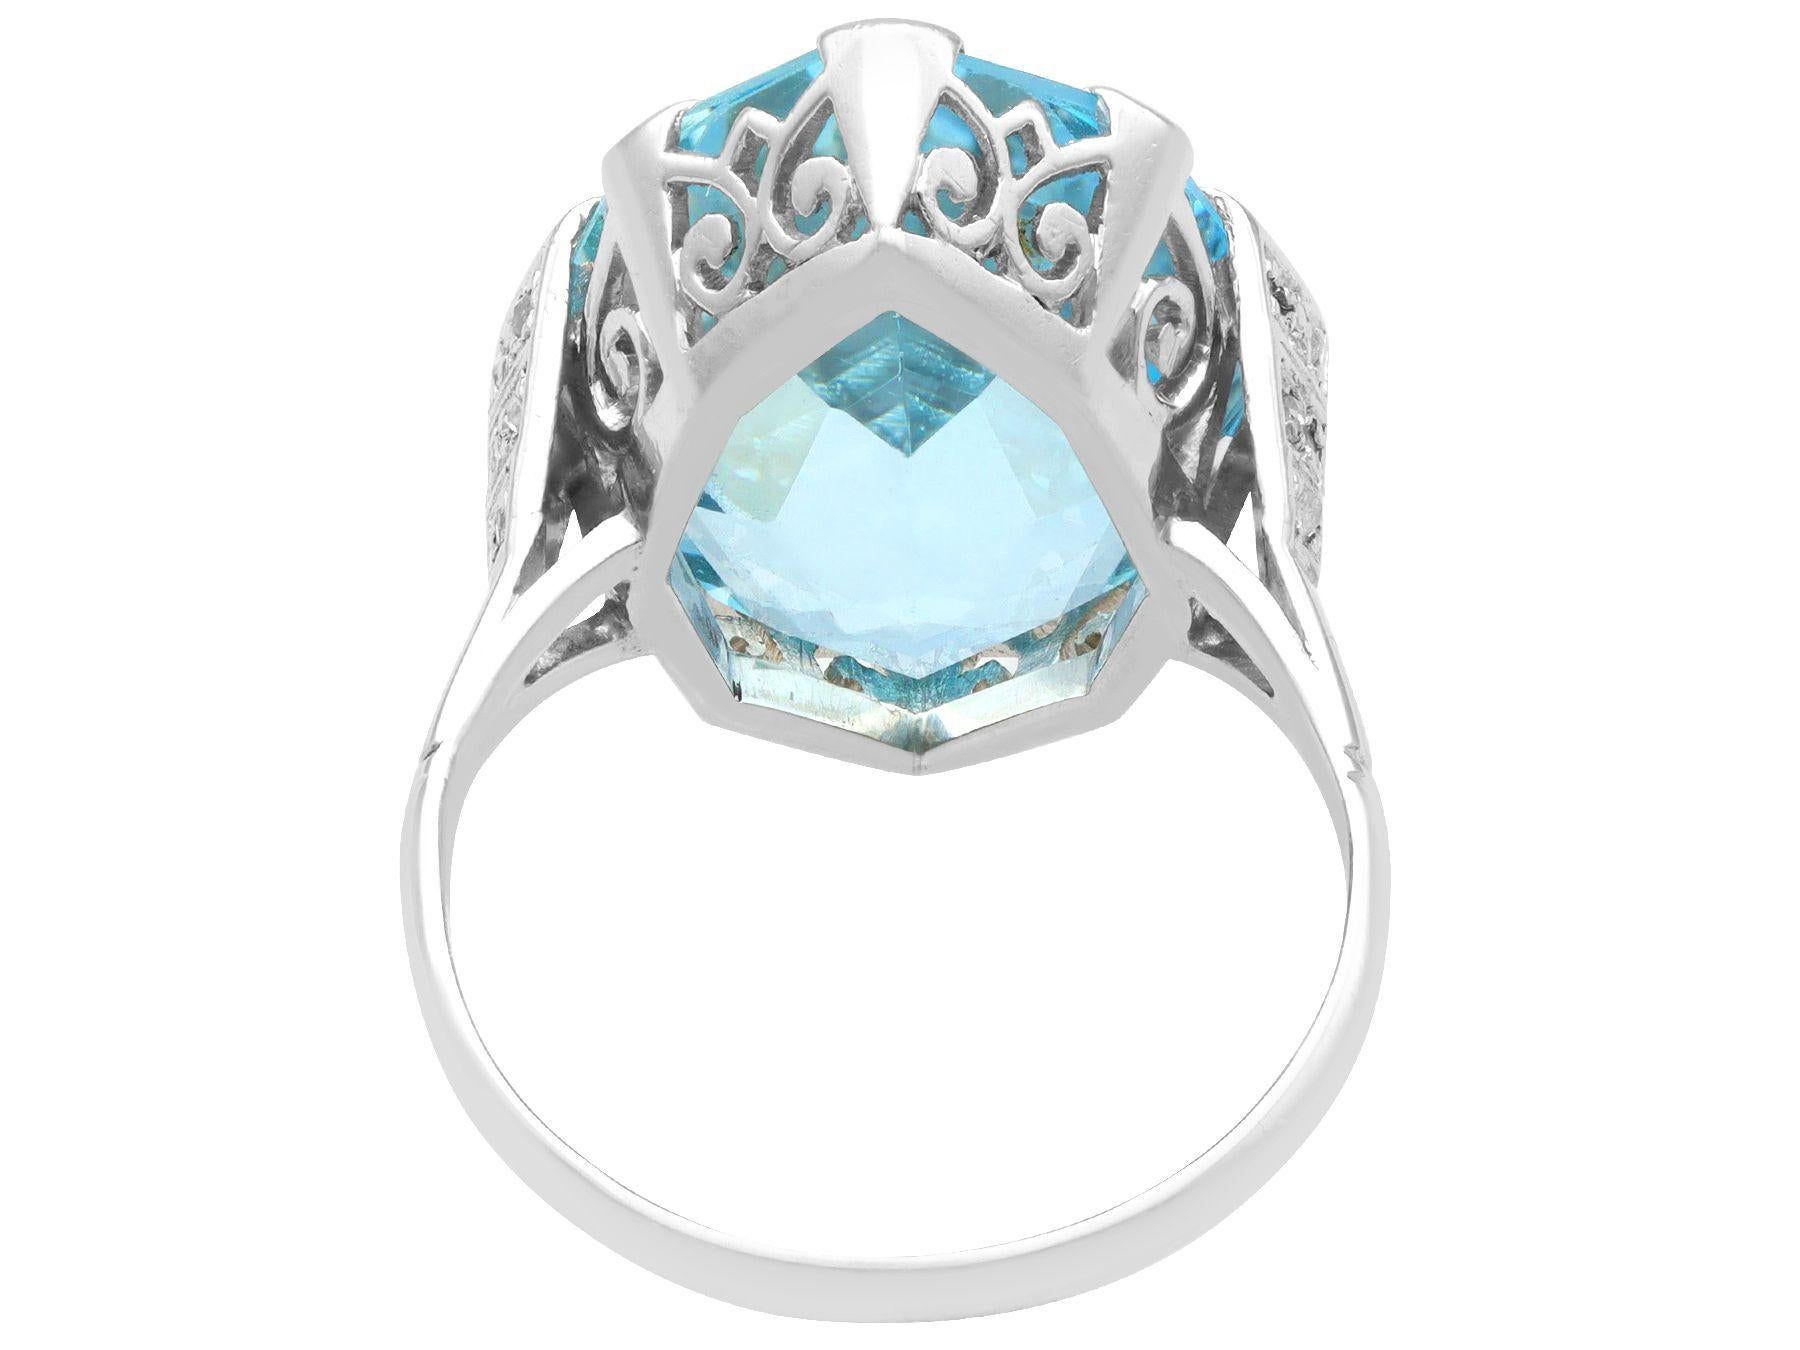 Vintage 14.35ct Aquamarine and Diamond and White Gold Cocktail Ring, circa 1950 In Excellent Condition For Sale In Jesmond, Newcastle Upon Tyne